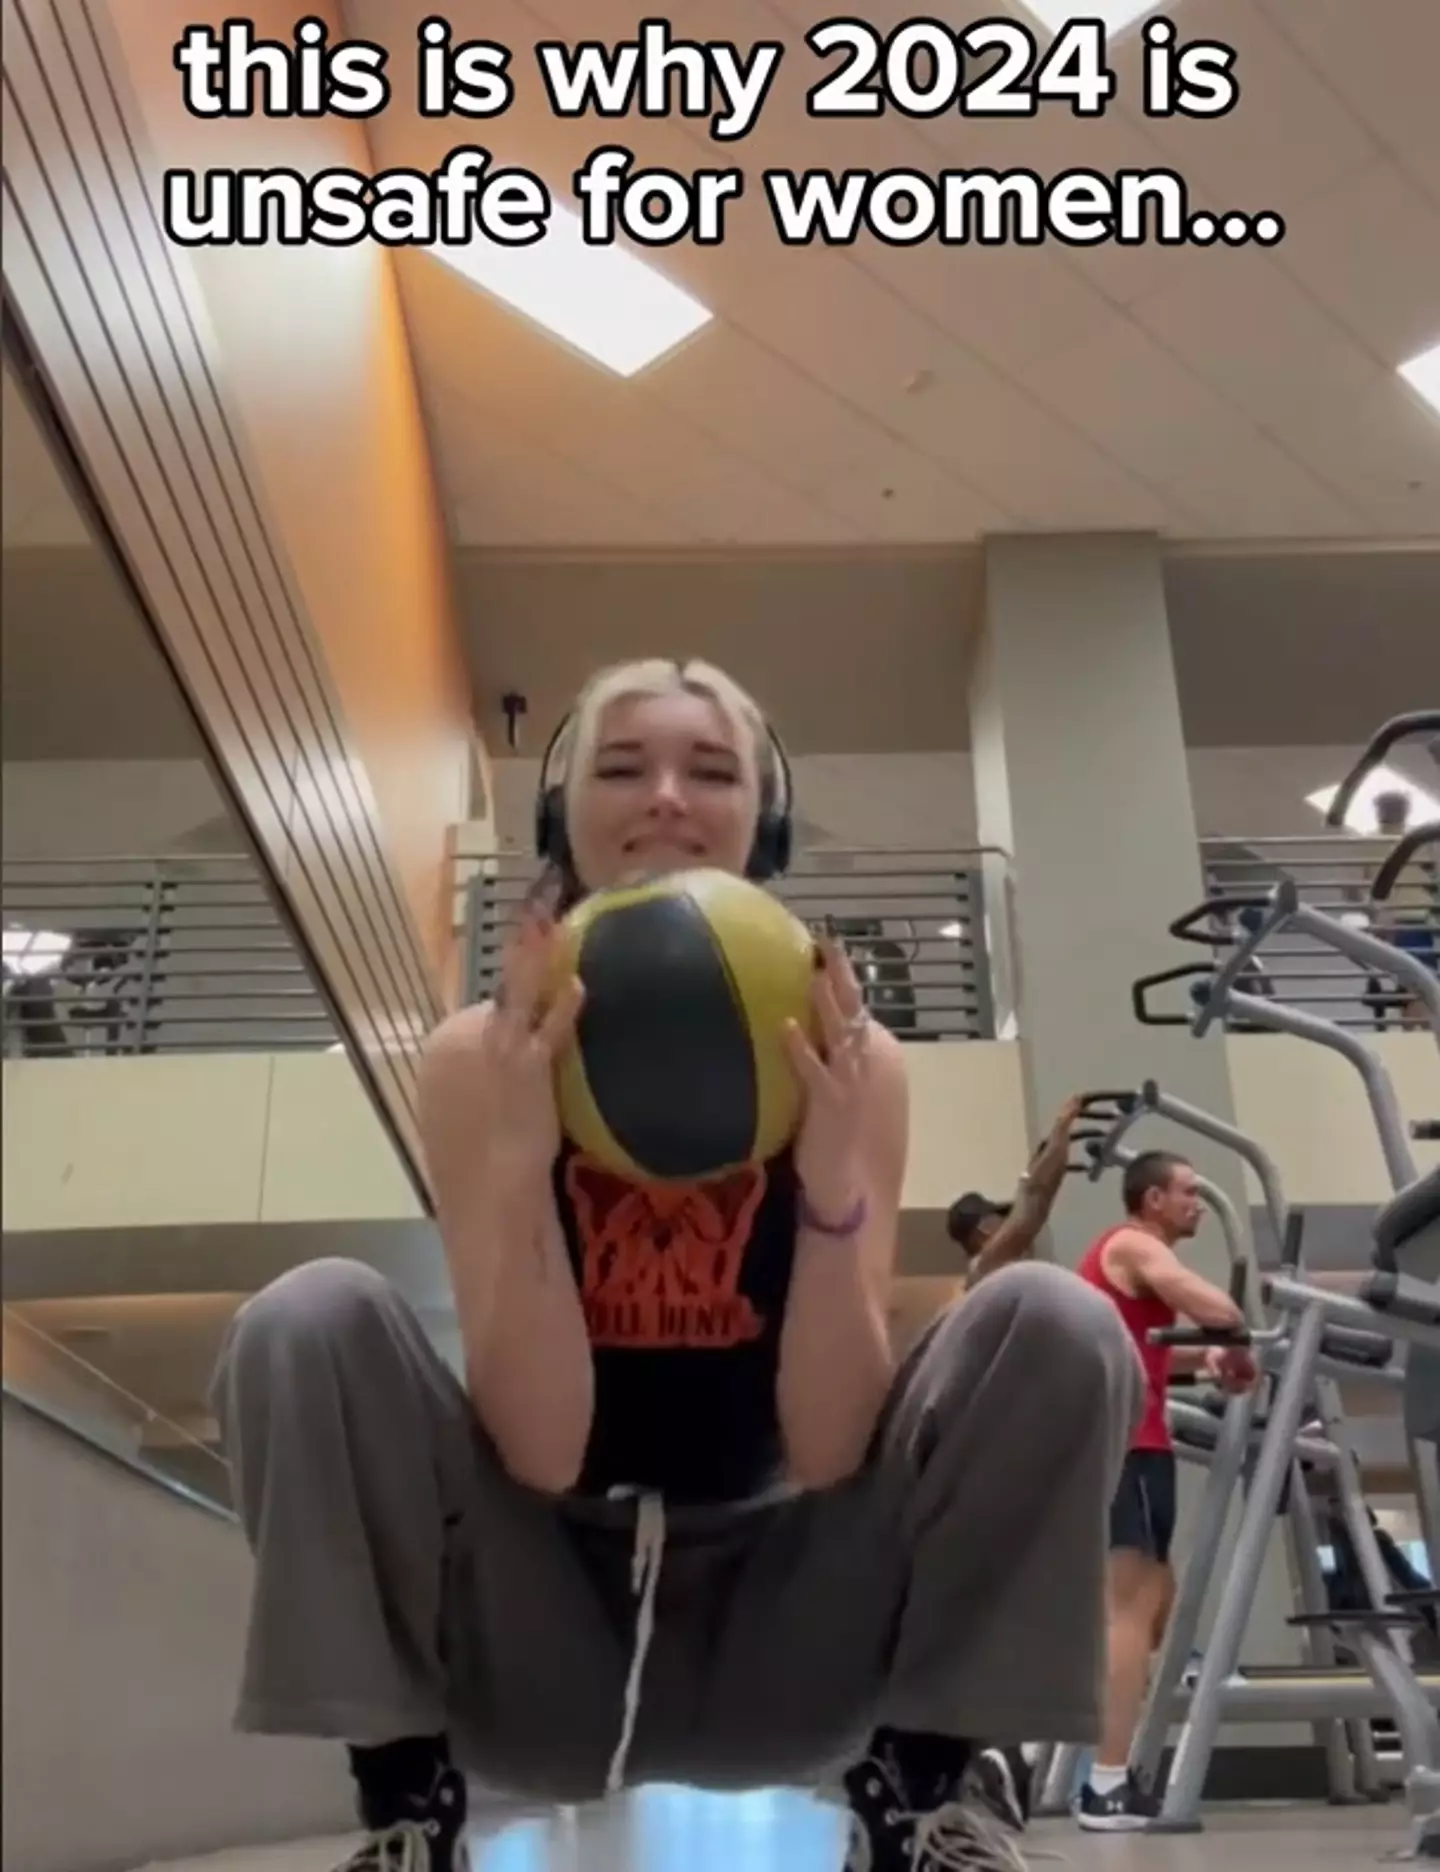 She filmed herself doing what she said was her leg day warm up at the gym.